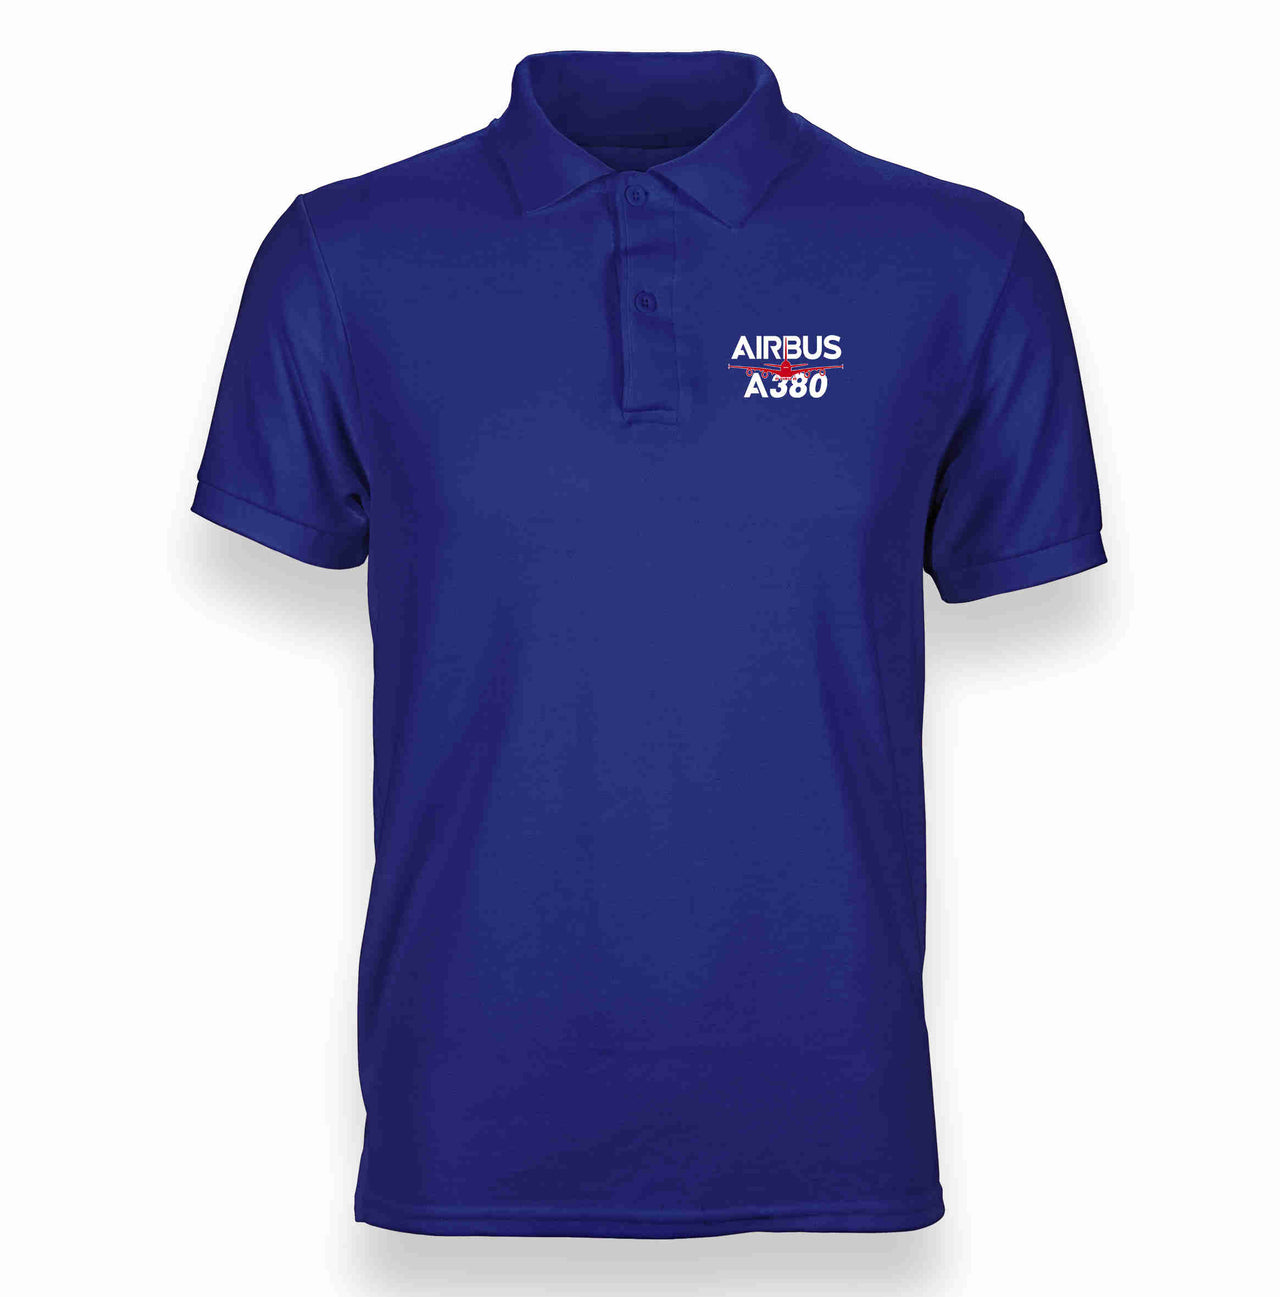 Amazing Airbus A380 Designed "WOMEN" Polo T-Shirts